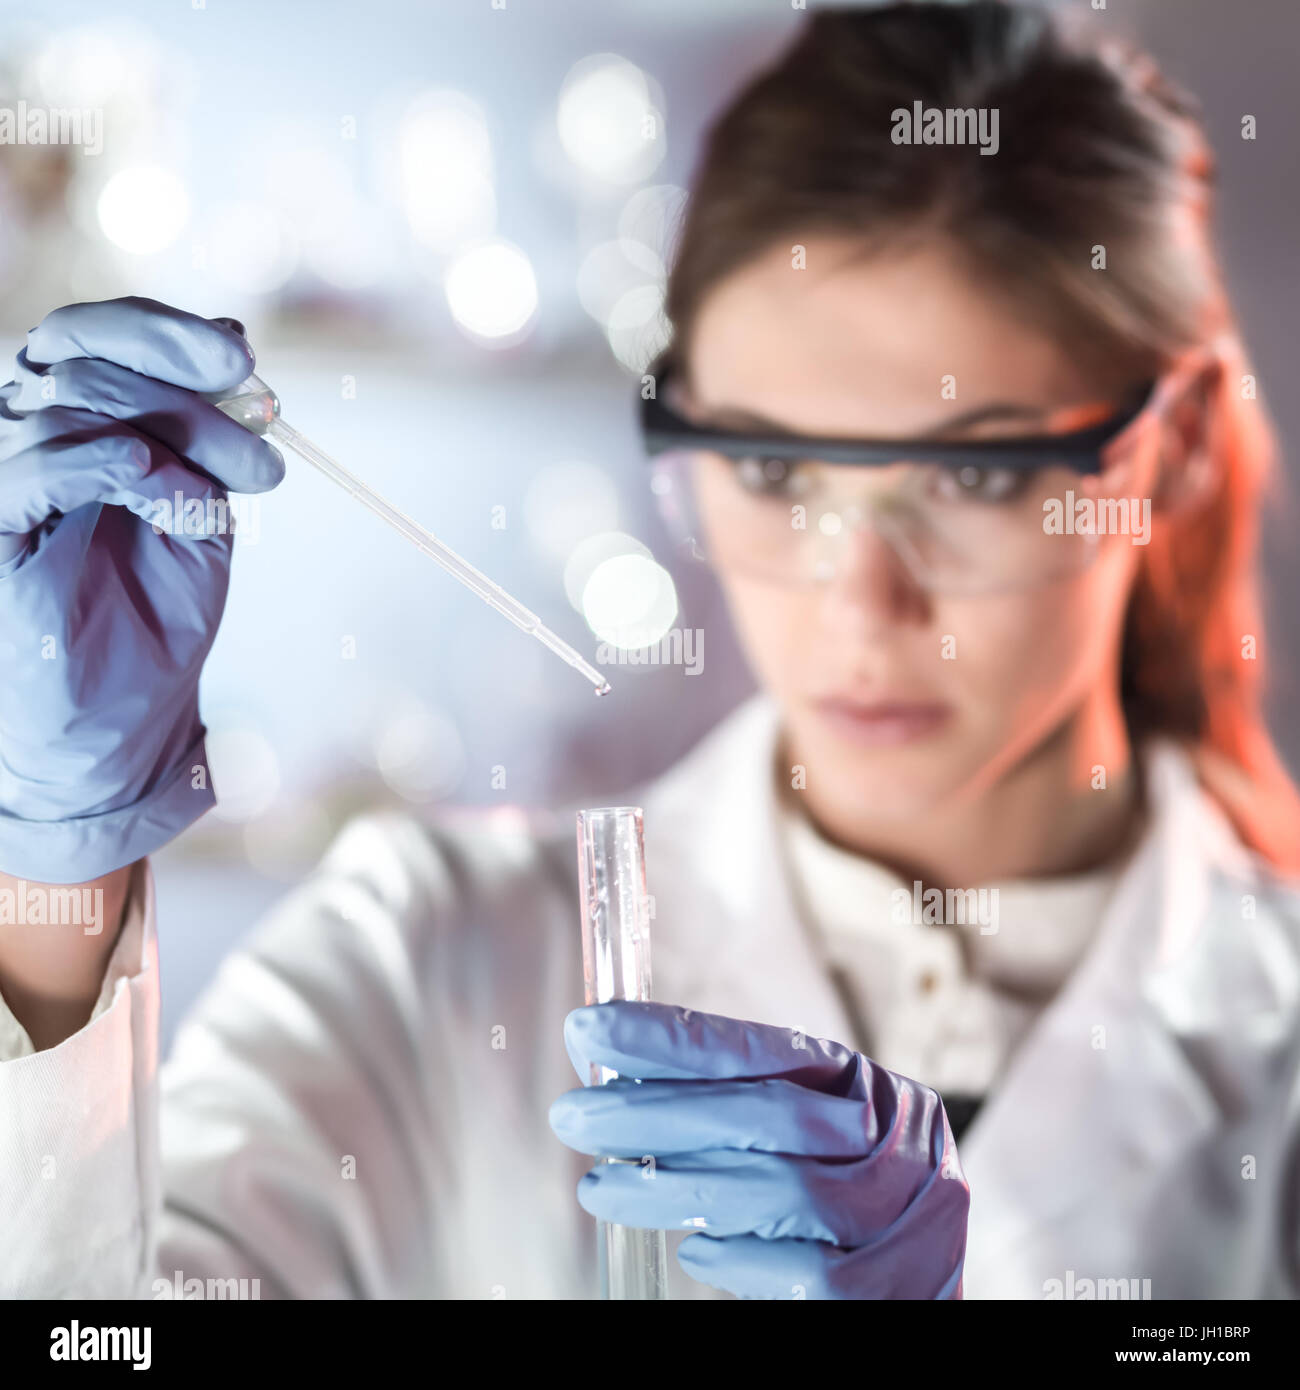 Young scientist pipetting in life science laboratory. Stock Photo